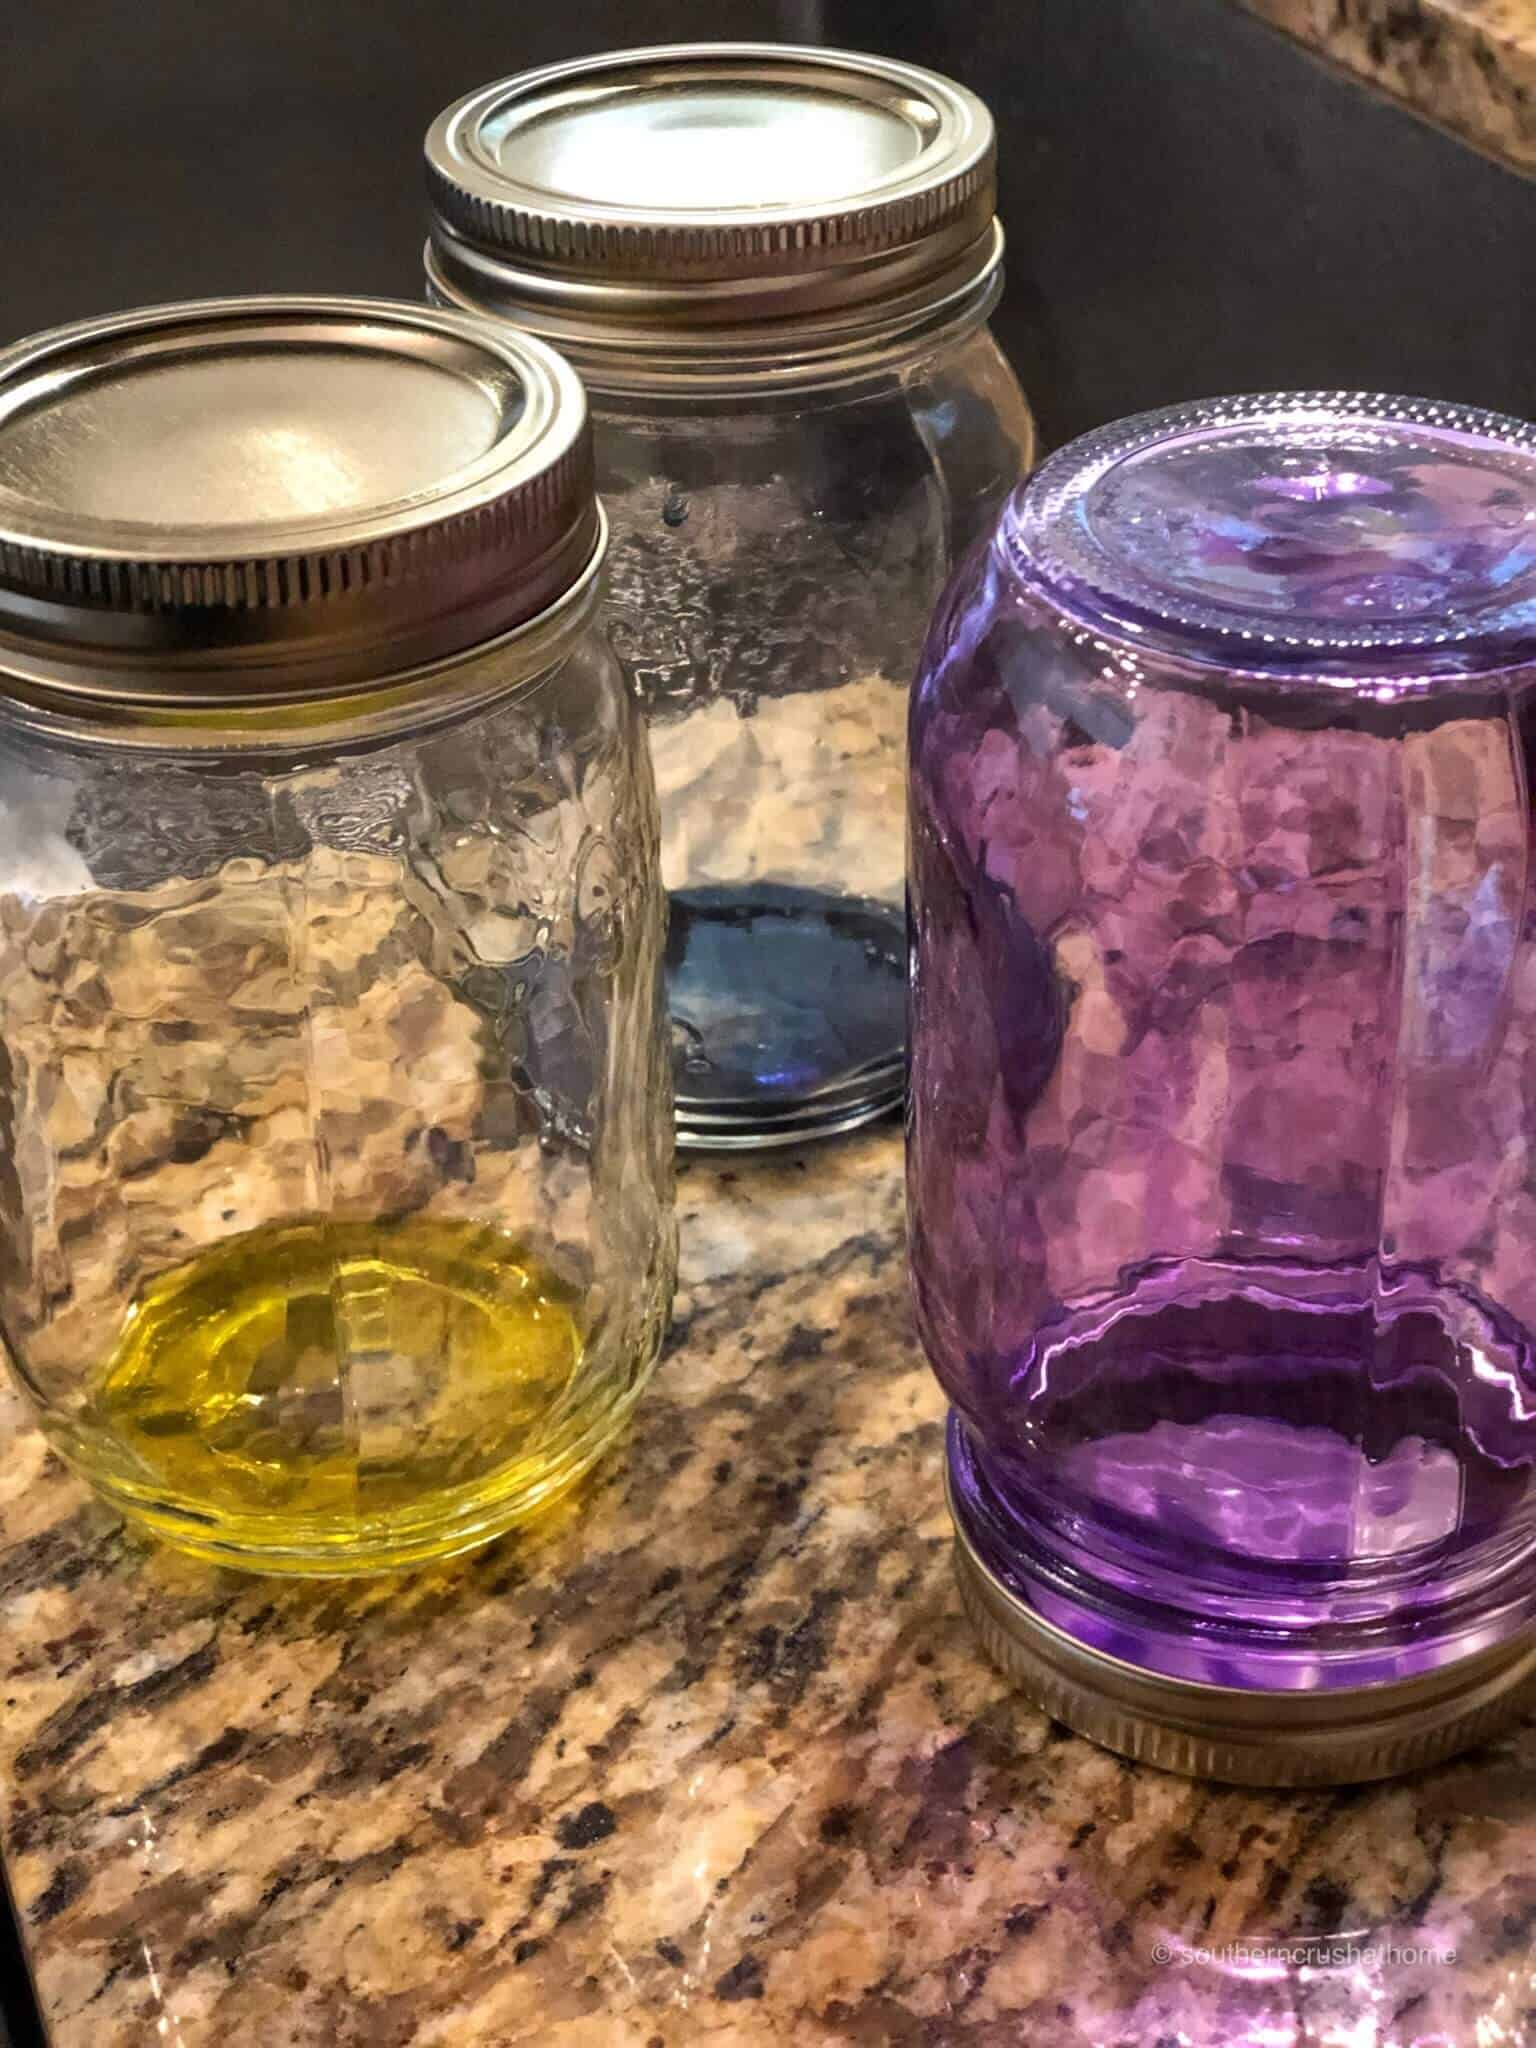 https://www.southerncrushathome.com/diy-stained-glass-mason-jars/diy-stained-glass-mason-jars-upside-down/